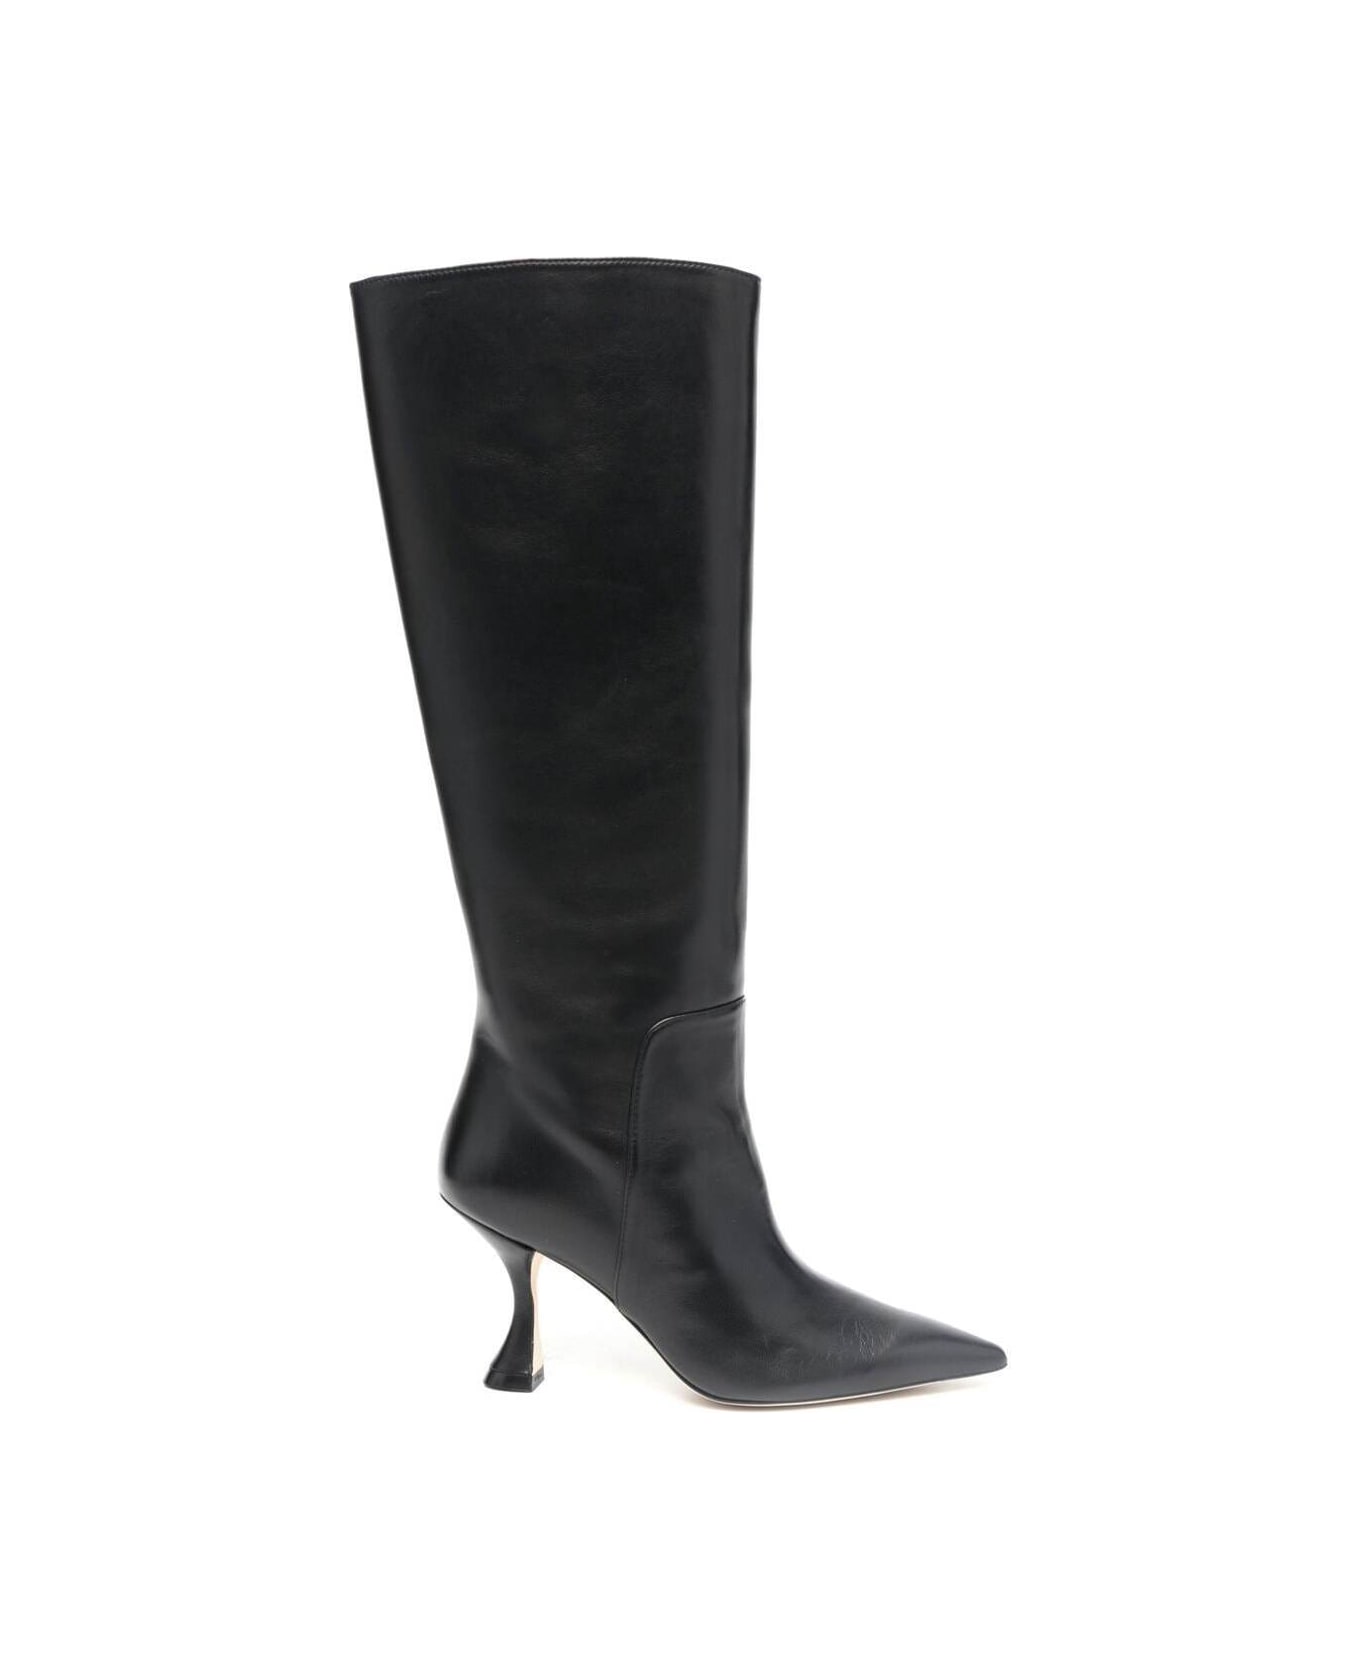 Stuart Weitzman Black Pointed Boots With Spool Heel In Smooth Leather Woman - Black ブーツ